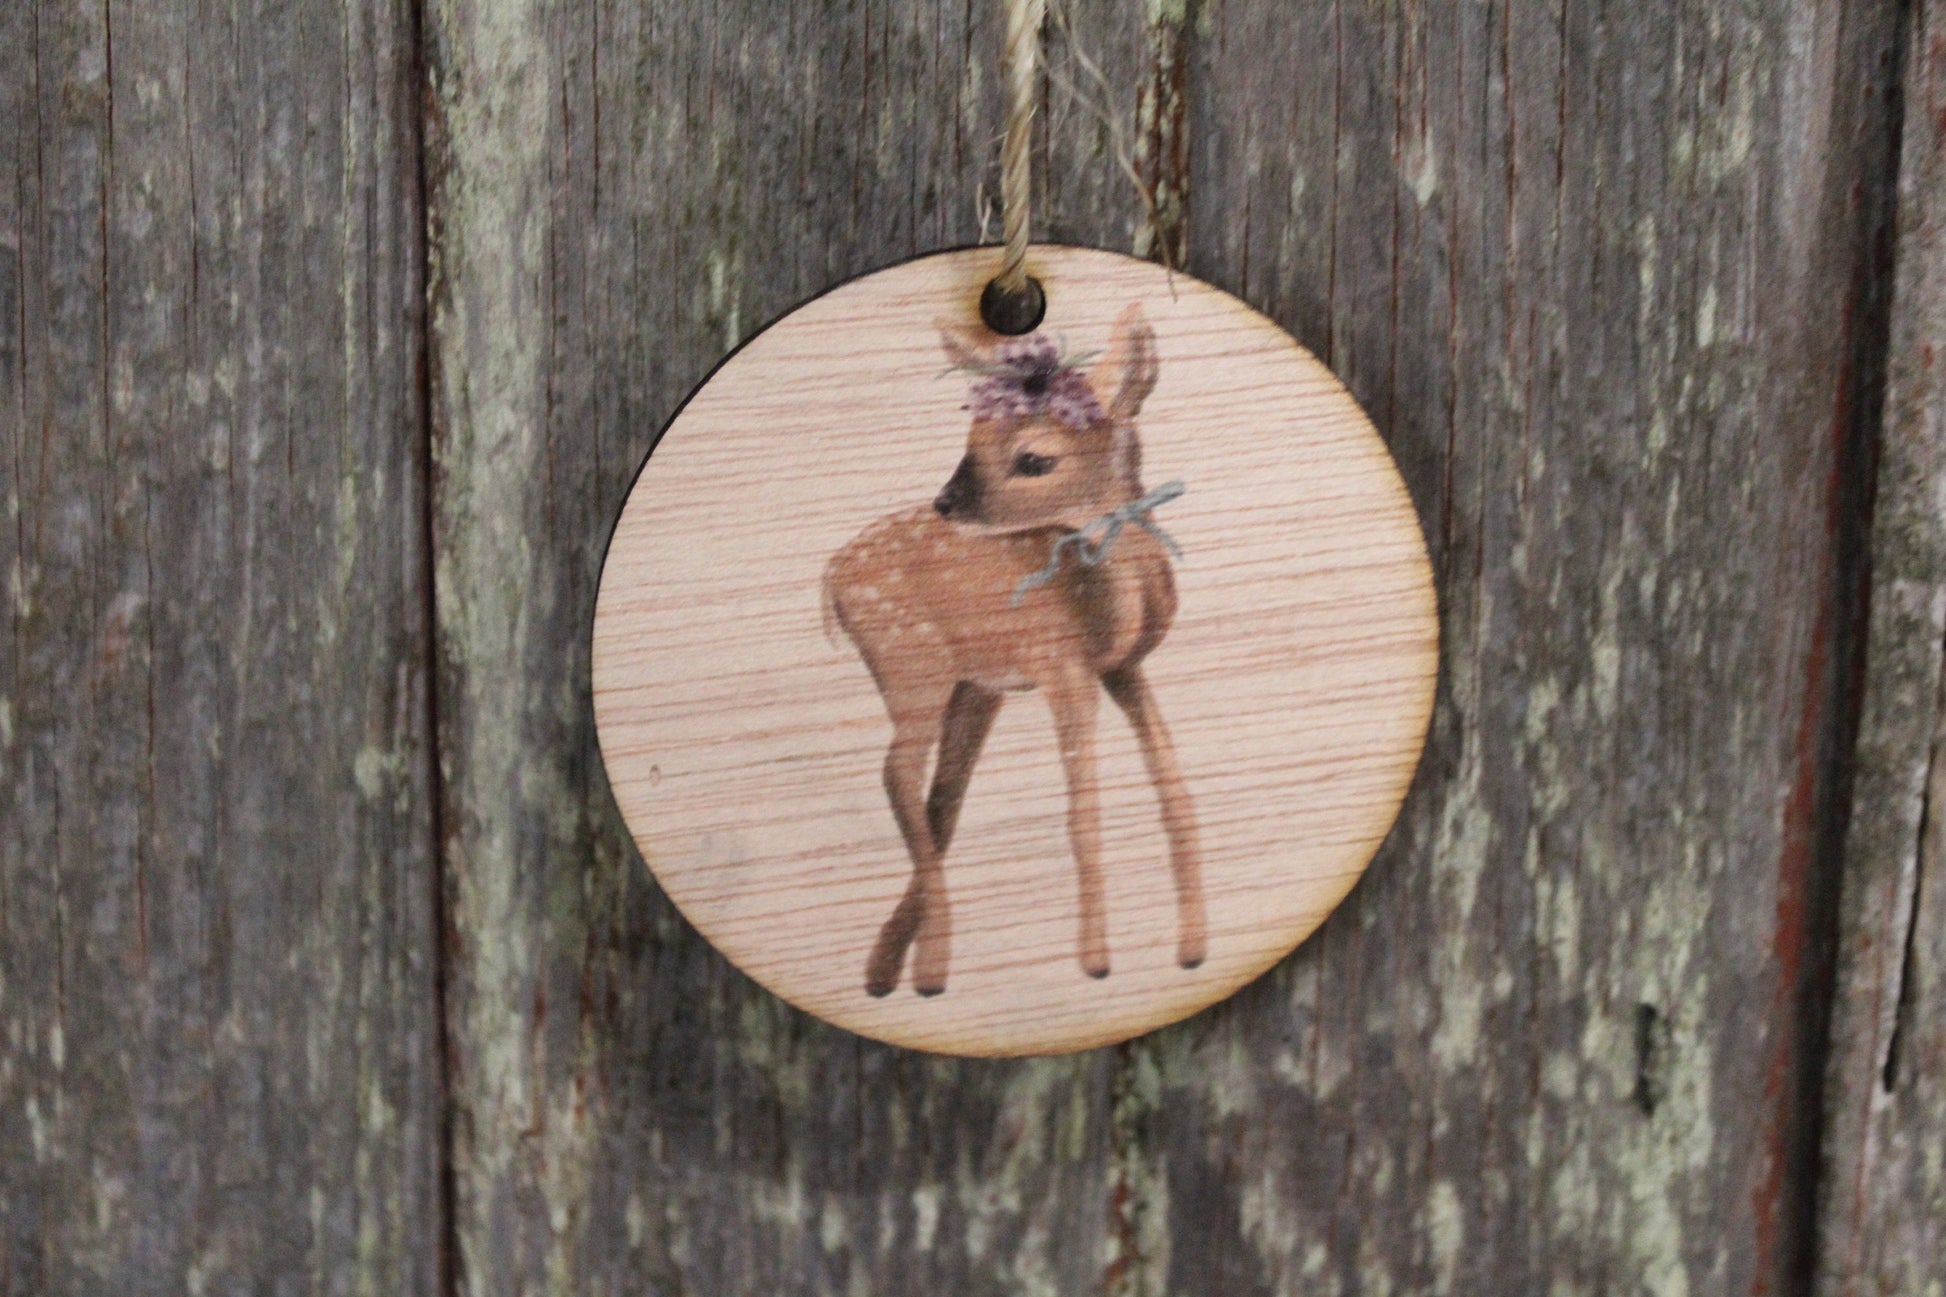 Ornament Baby Fawn Christmas Deer Winter Flowers Floral Crown Ribbon Wall Hanging Tree Rustic Farmhouse Wood